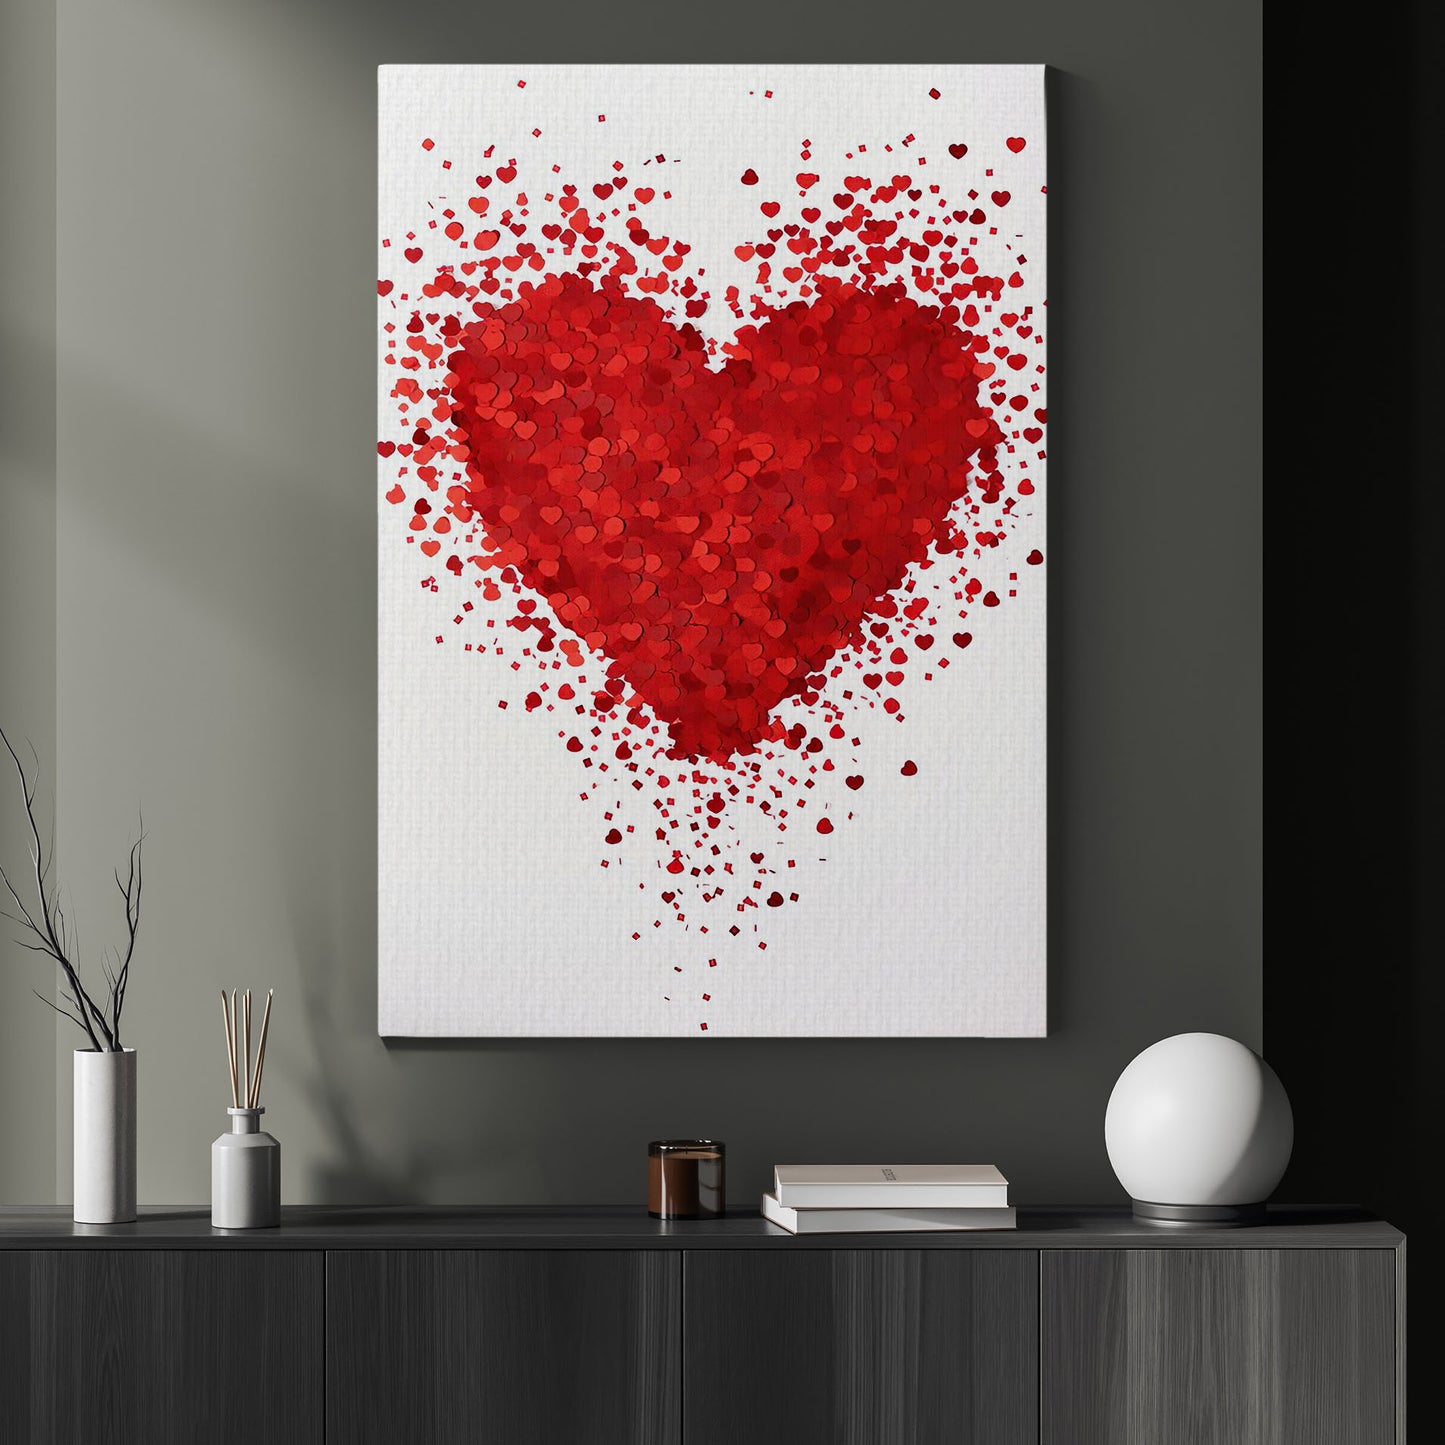 A Heart's Abstract, Valentine's Day Canvas Painting, Love Wall Art Decor - Valentines Poster Gift